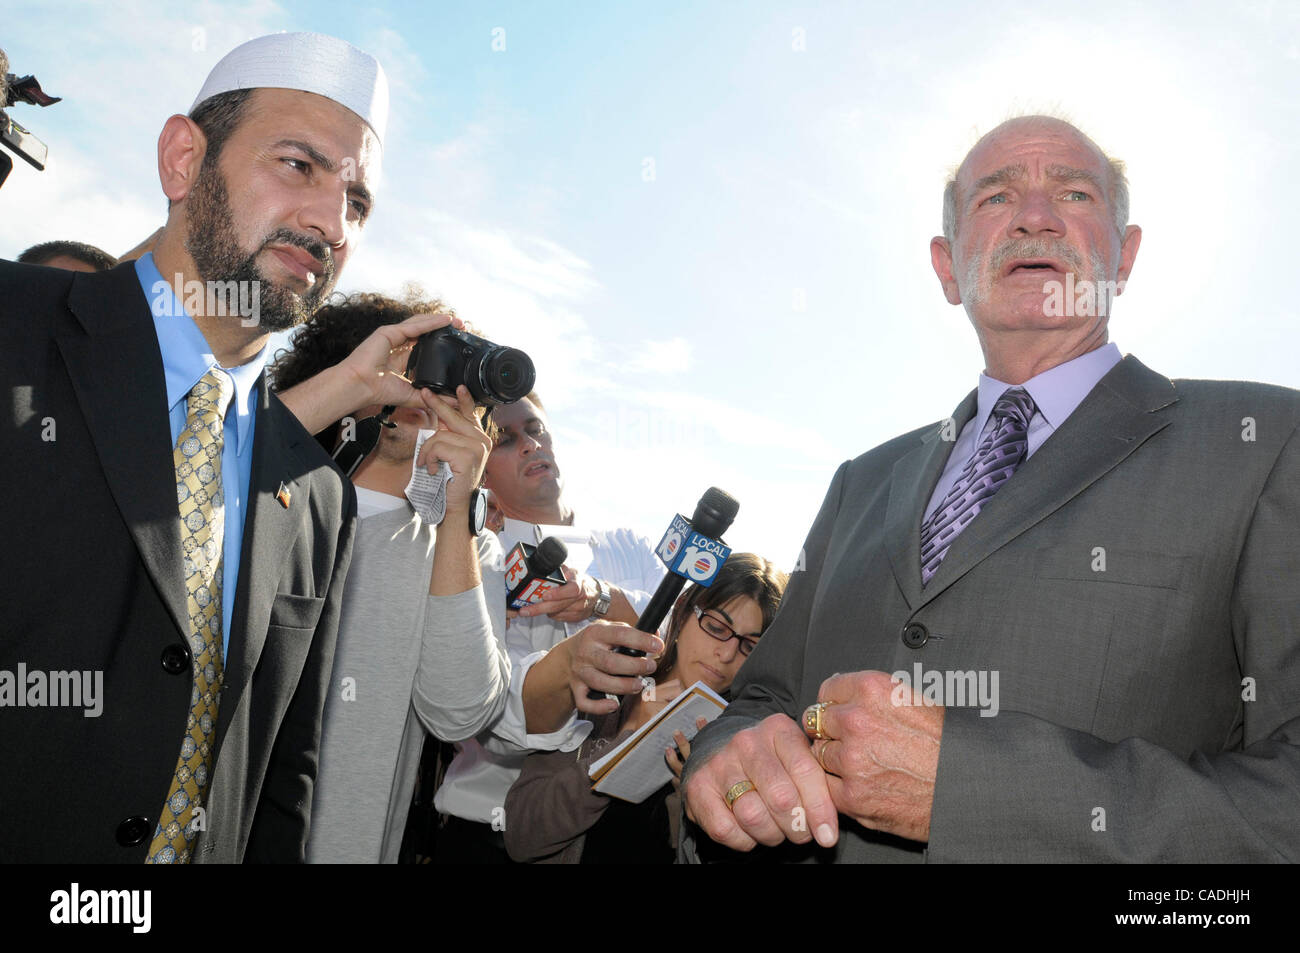 Rev. TERRY JONES, right, pastor of the Dove World Outreach Center, and Imam MUHAMMAD MUSRI, left, president of the Islamic Society of Central Florida, answer questions from reporters after announcing the cancellation of the planned Quran burning outside Jones's church. Rev. Terry Jones announced a c Stock Photo